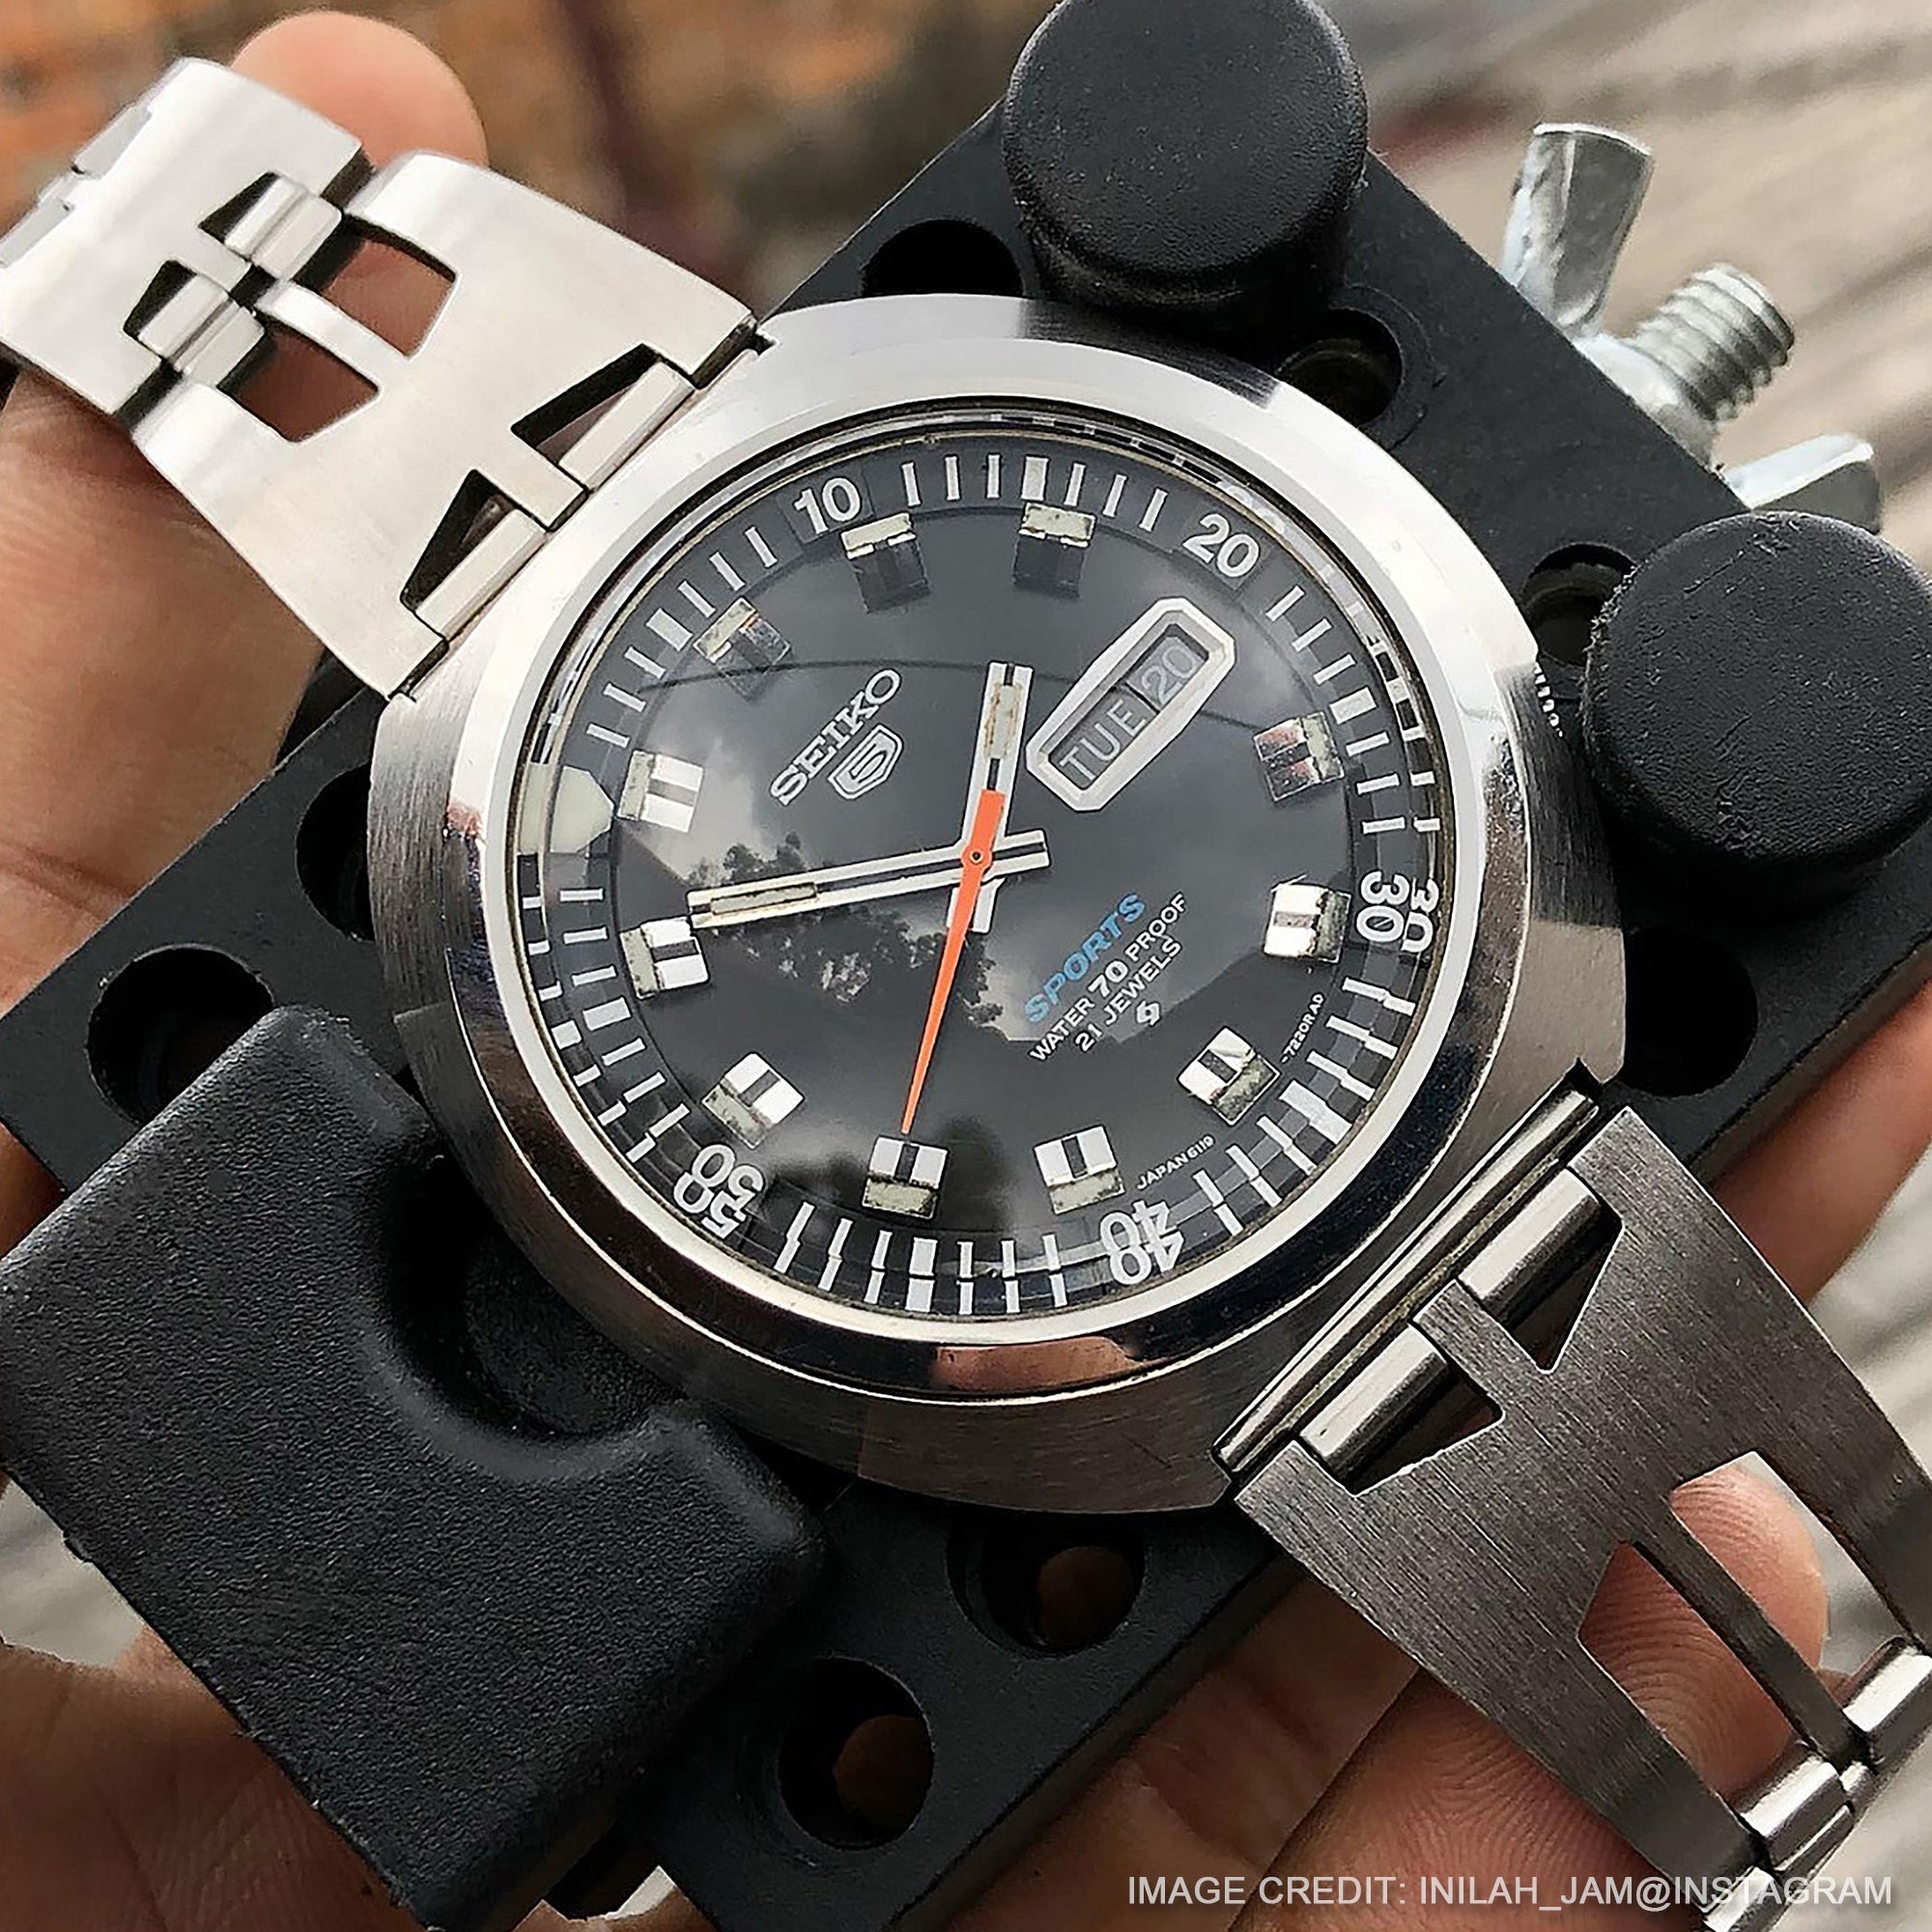 The original rally bracelet of the Seiko Diver UFO Black Dial 6119-7160 watch by Strapcode 